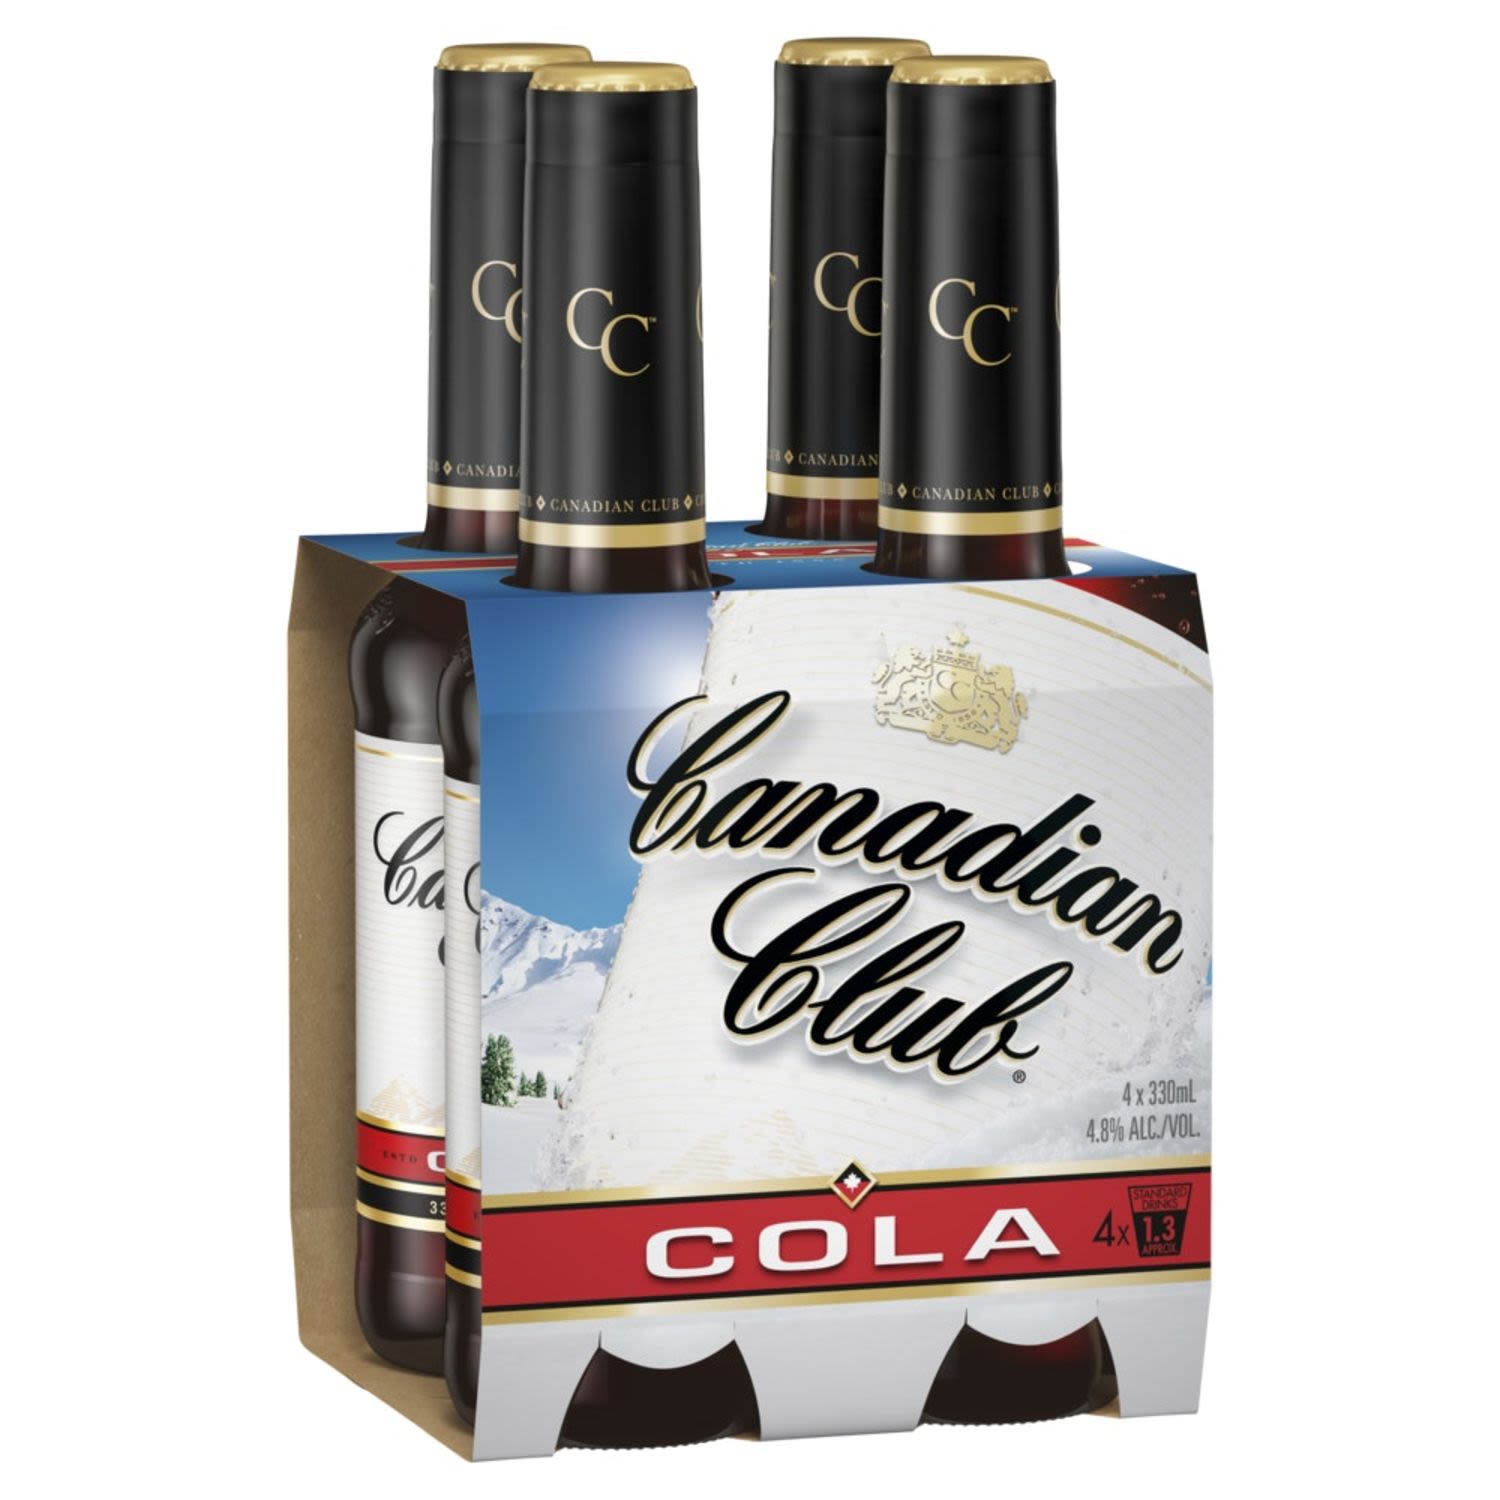 Canadian Club Whisky RTD comes as a blend of six-year-old Canadian Club and Cola. Enjoy chilled or poured over ice for the ultimate refreshment.<br /> <br />Alcohol Volume: 4.80%<br /><br />Pack Format: 4 Pack<br /><br />Standard Drinks: 1.3</br /><br />Pack Type: Bottle<br />